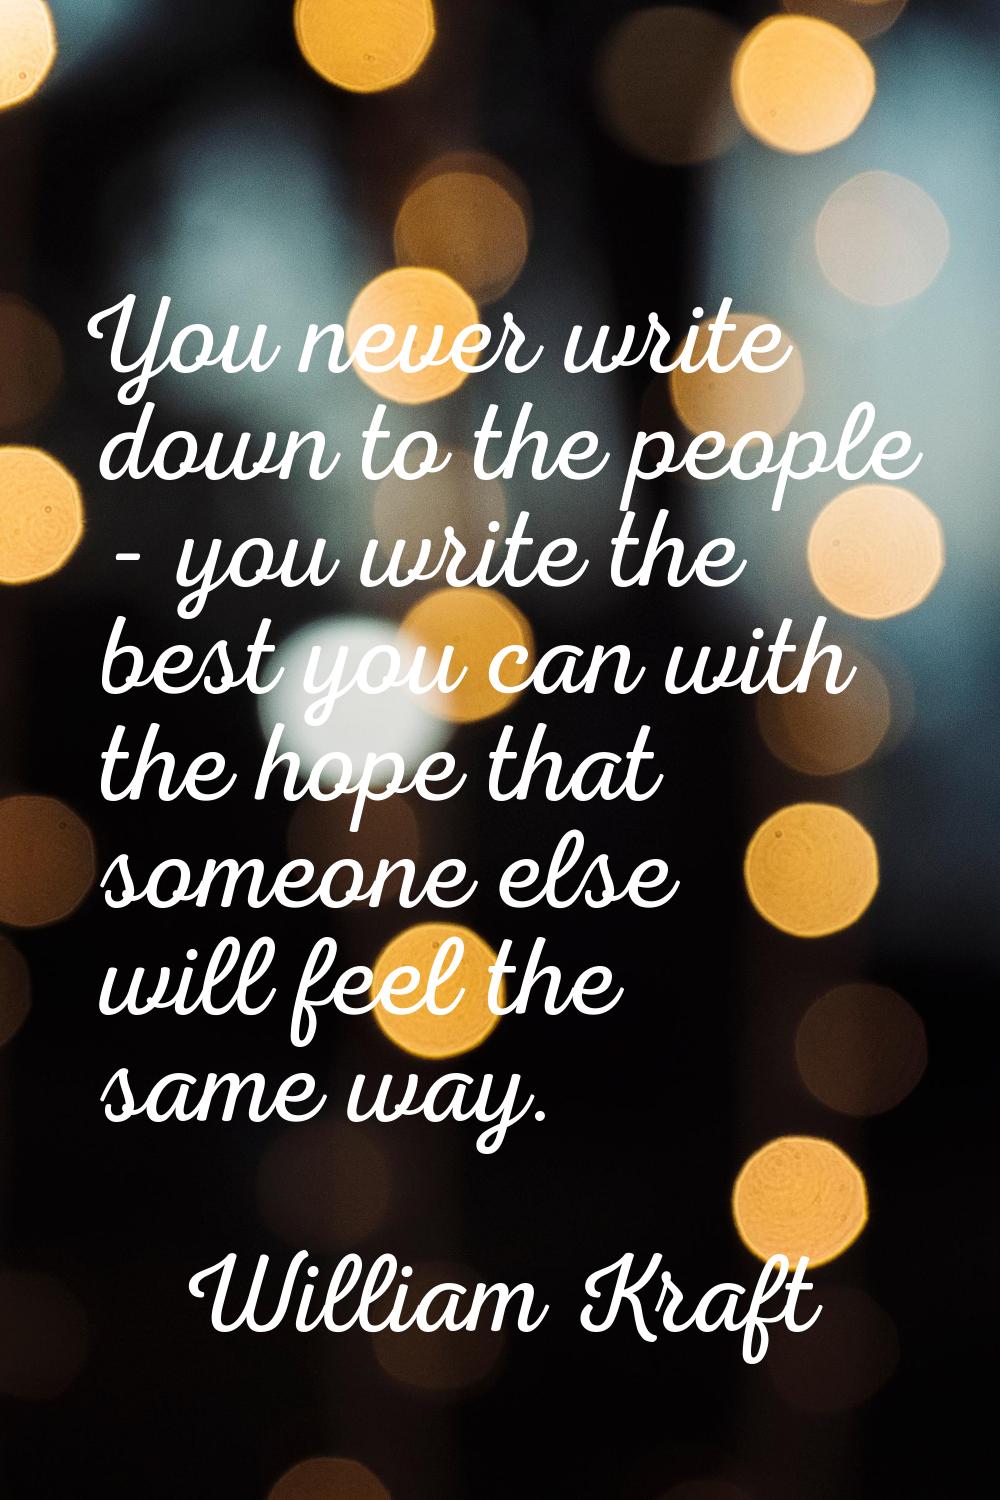 You never write down to the people - you write the best you can with the hope that someone else wil